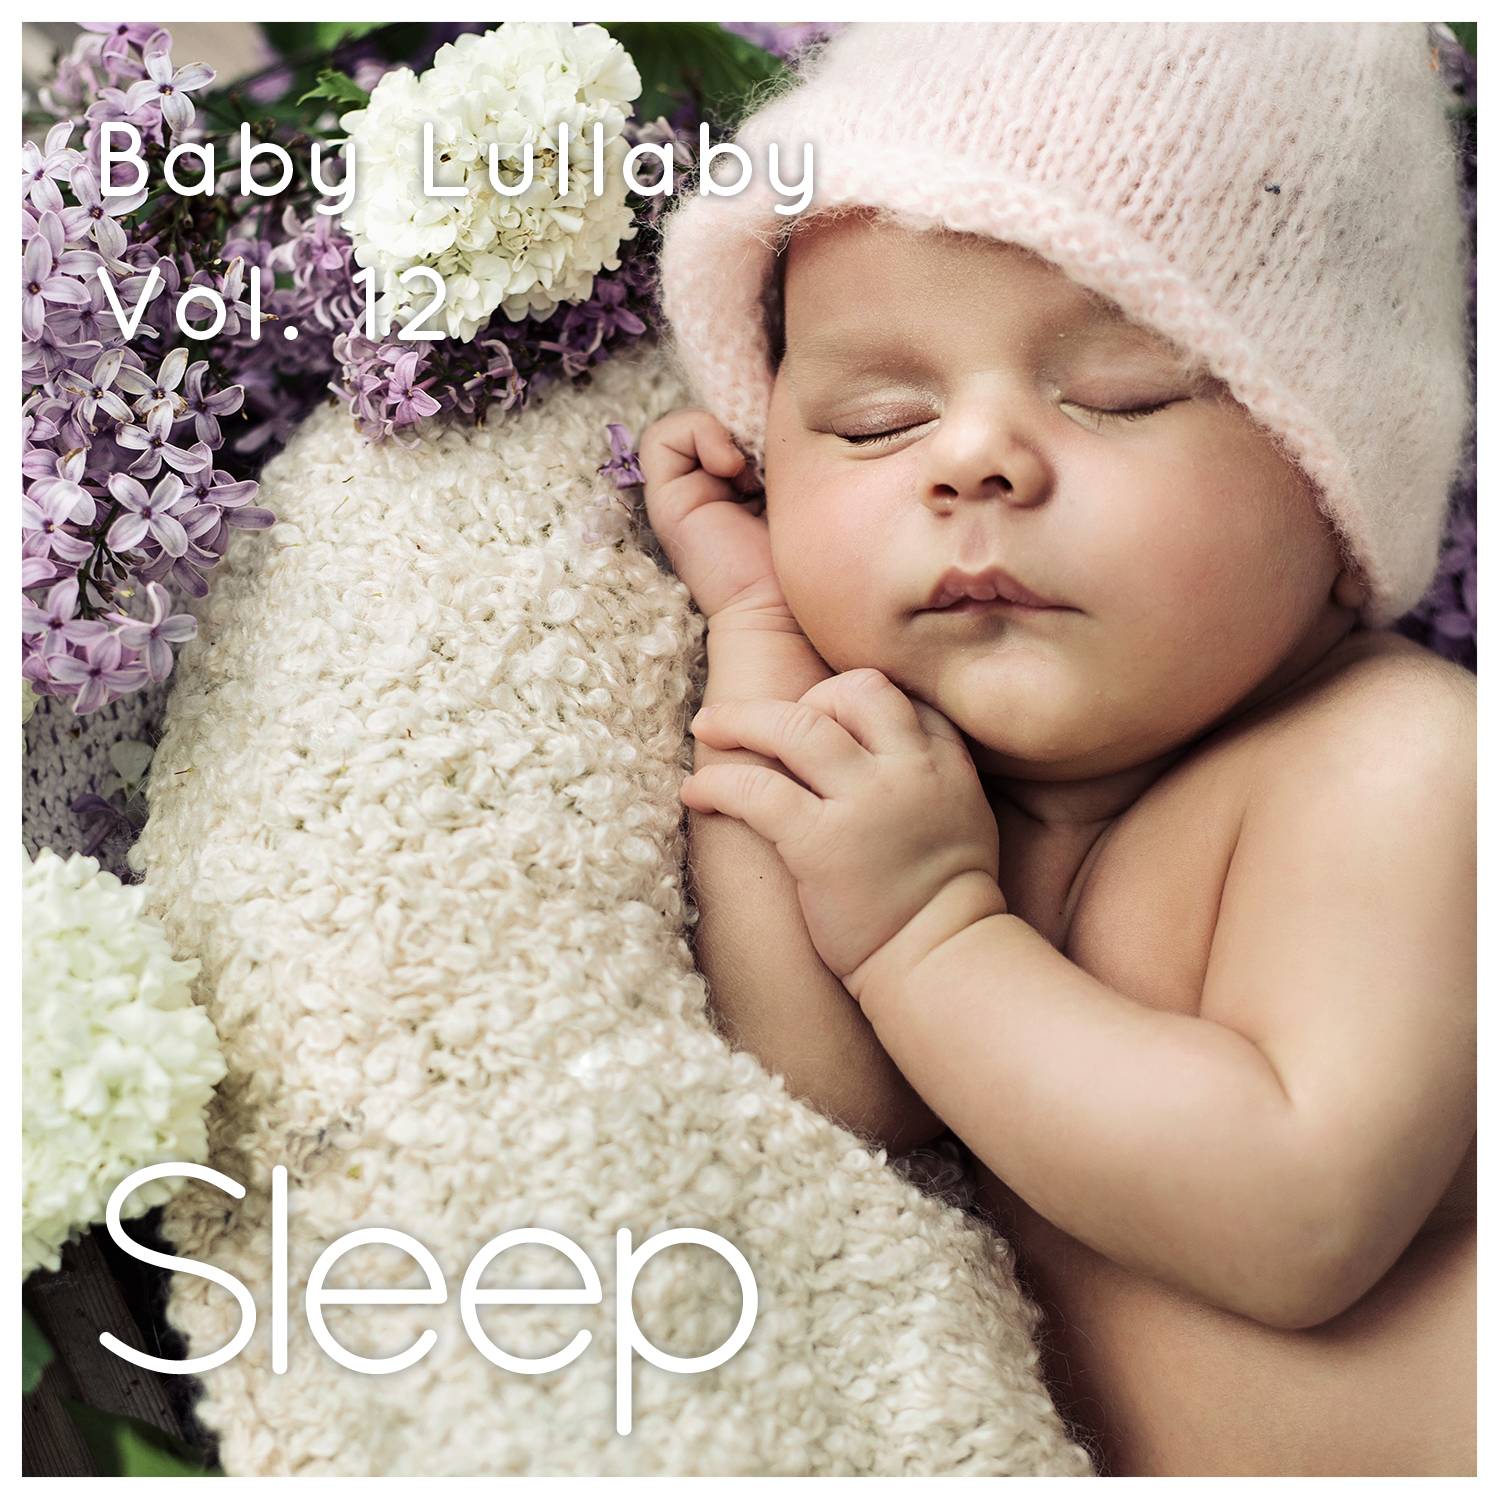 Baby Sleep Ambient Lullaby, Pt. 56